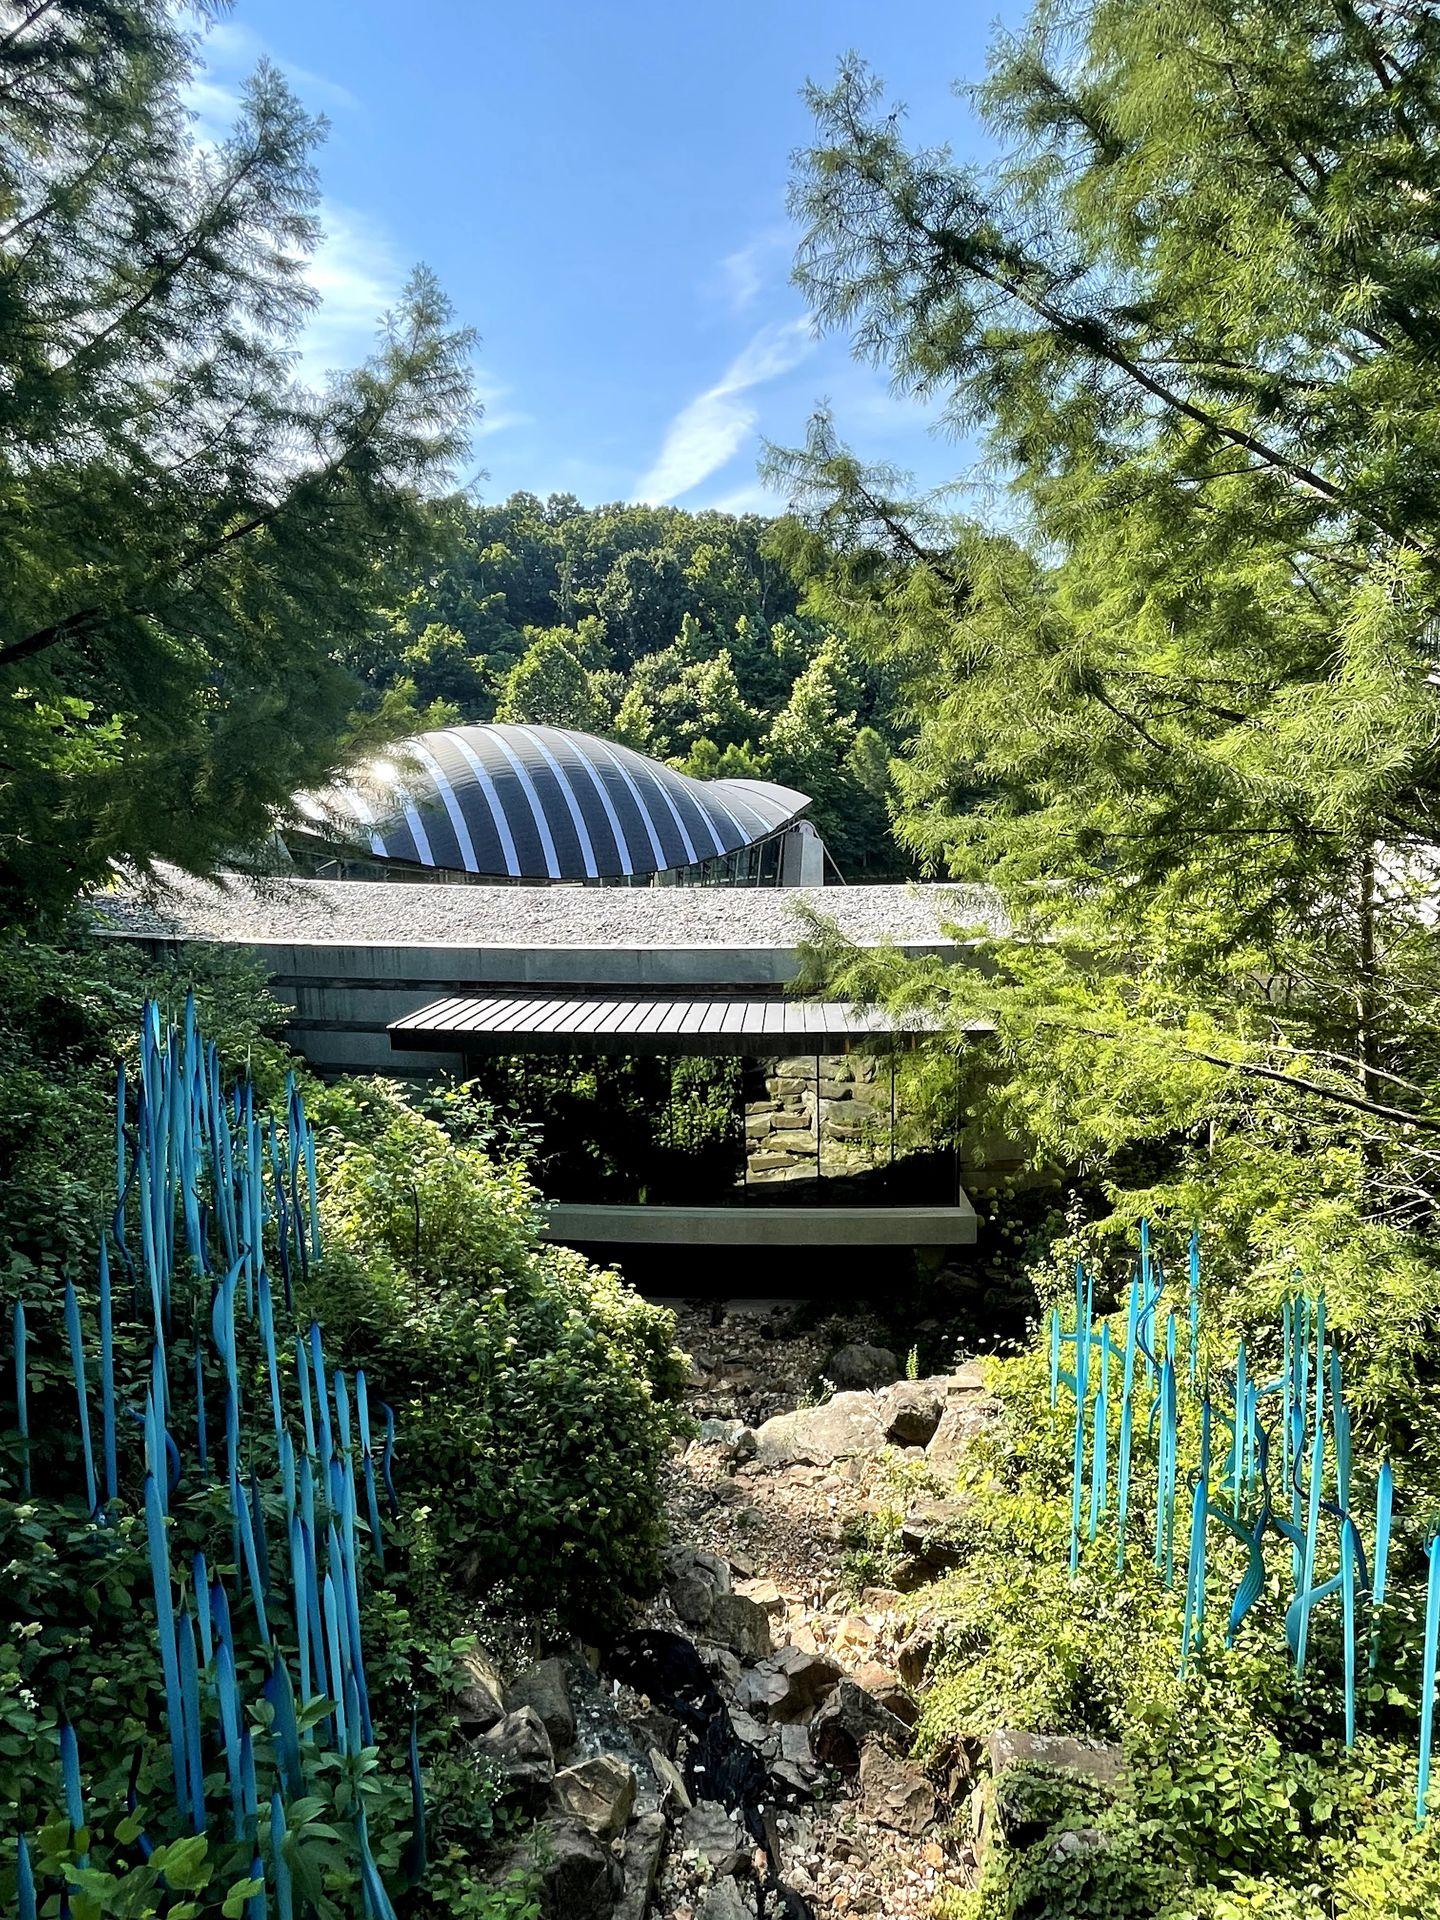 The exterior of the Crystal Bridges from a distance. There is a curved building, trees and some blue sculptures outside.